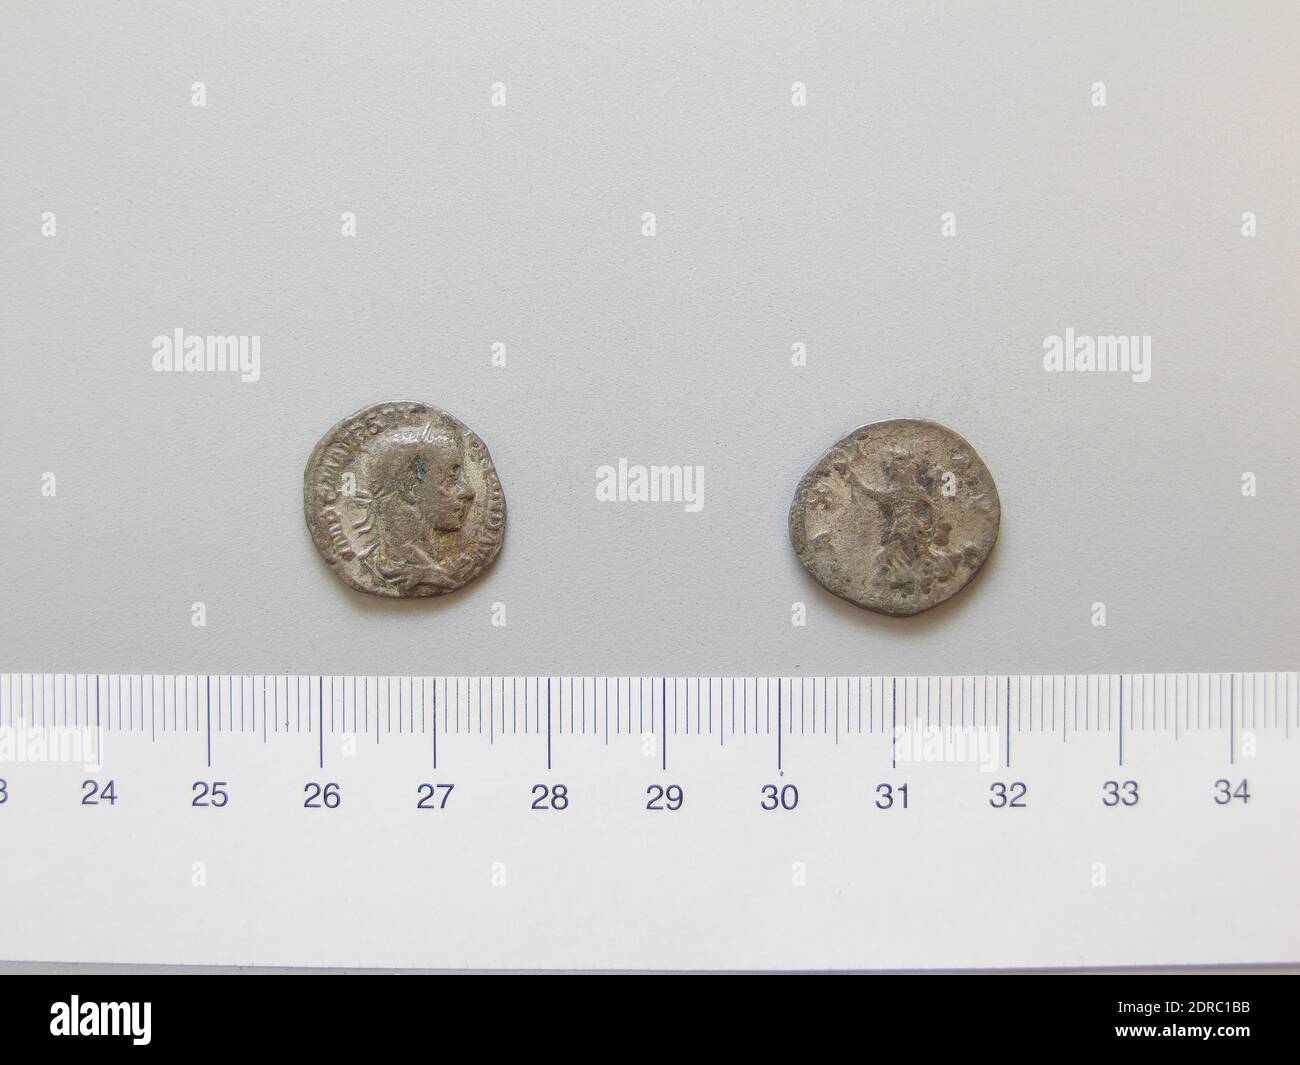 Ruler: Severus Alexander, Emperor of Rome, A.D. 208–235, ruled A.D. 222–35, Mint: Rome, Denarius of Severus Alexander, Emperor of Rome from Rome, 222–28, Silver, 2.76 g, 11:00, 19 mm, Made in Rome, Italy, Roman, 3rd century A.D., Numismatics Stock Photo